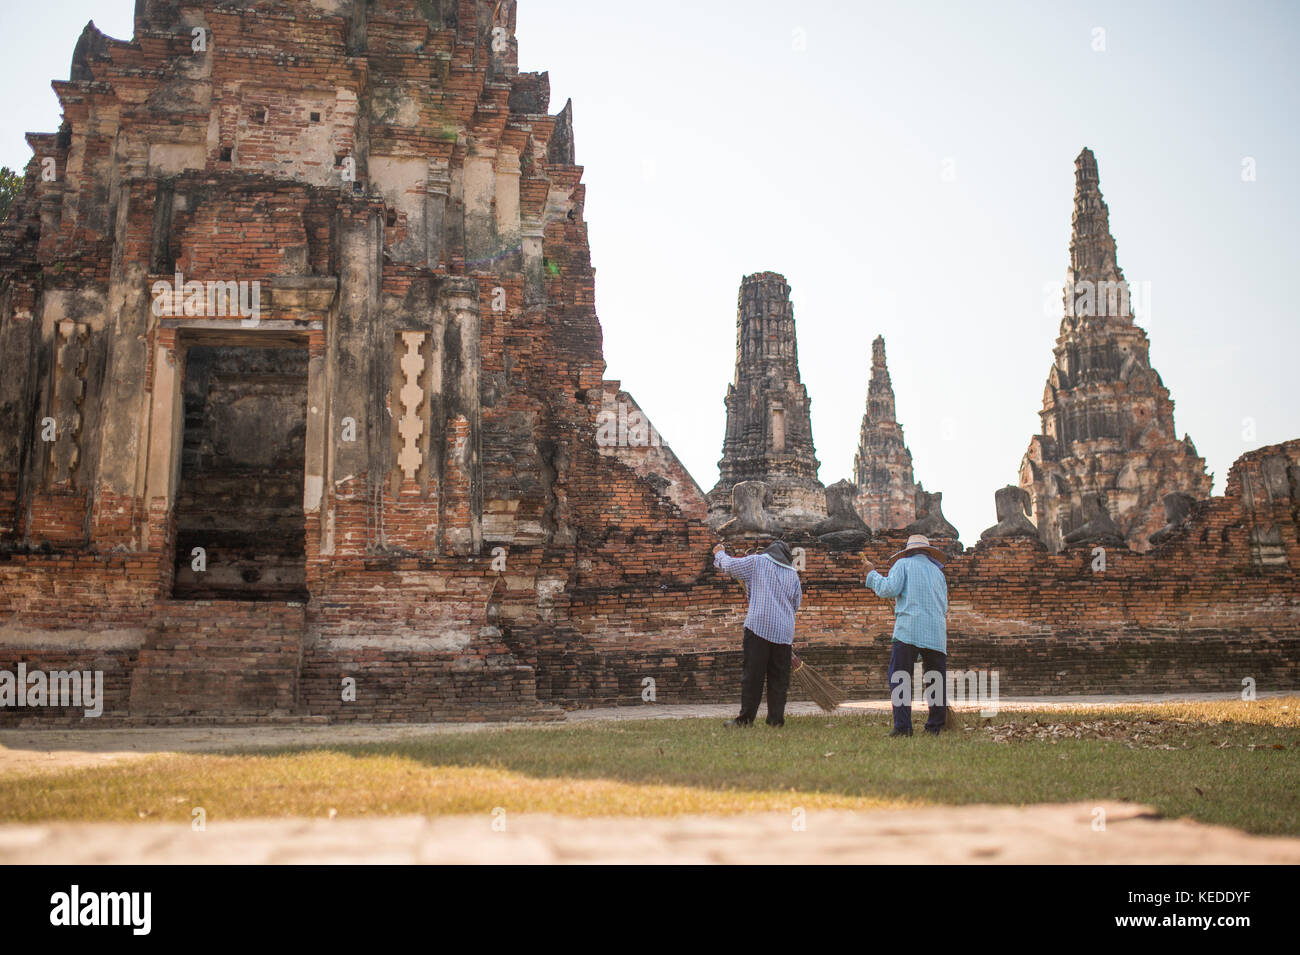 Two workers are picking up leaves in the Wat Chaiwatthanaram complex in Ayutthaya city, Thailand. Stock Photo